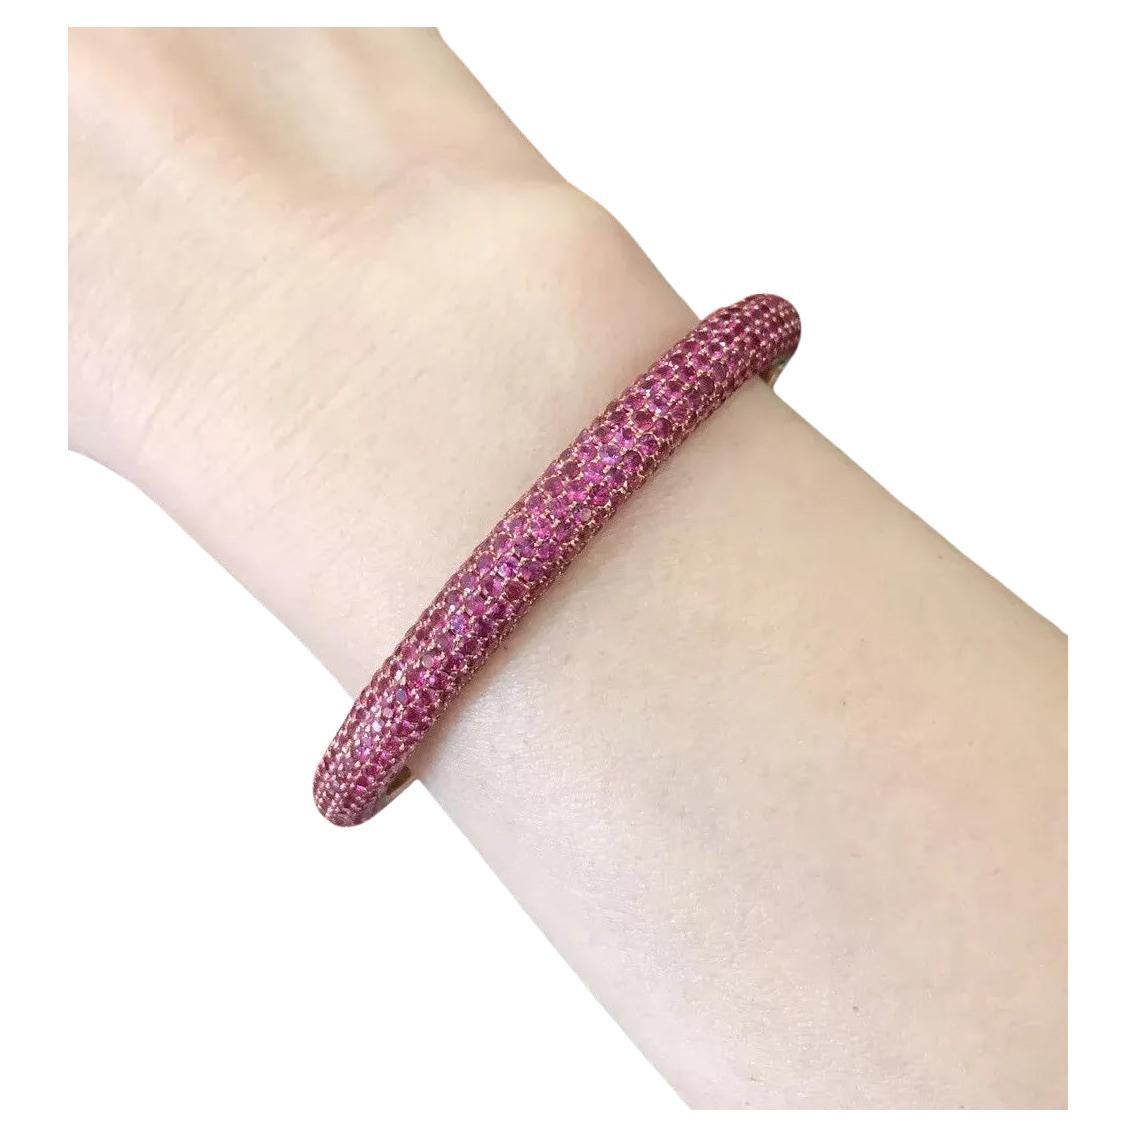 19.22 Carats Total Weight Ruby Pave Oval Bangle Bracelet in 18k Rose Gold

Oval Shaped Pave Bangle Bracelet features 19.22 carats Round Rubies Pave set in 18k Rose Gold. Bangle has a hidden twist hinged opening.

Total ruby weight is 19.22